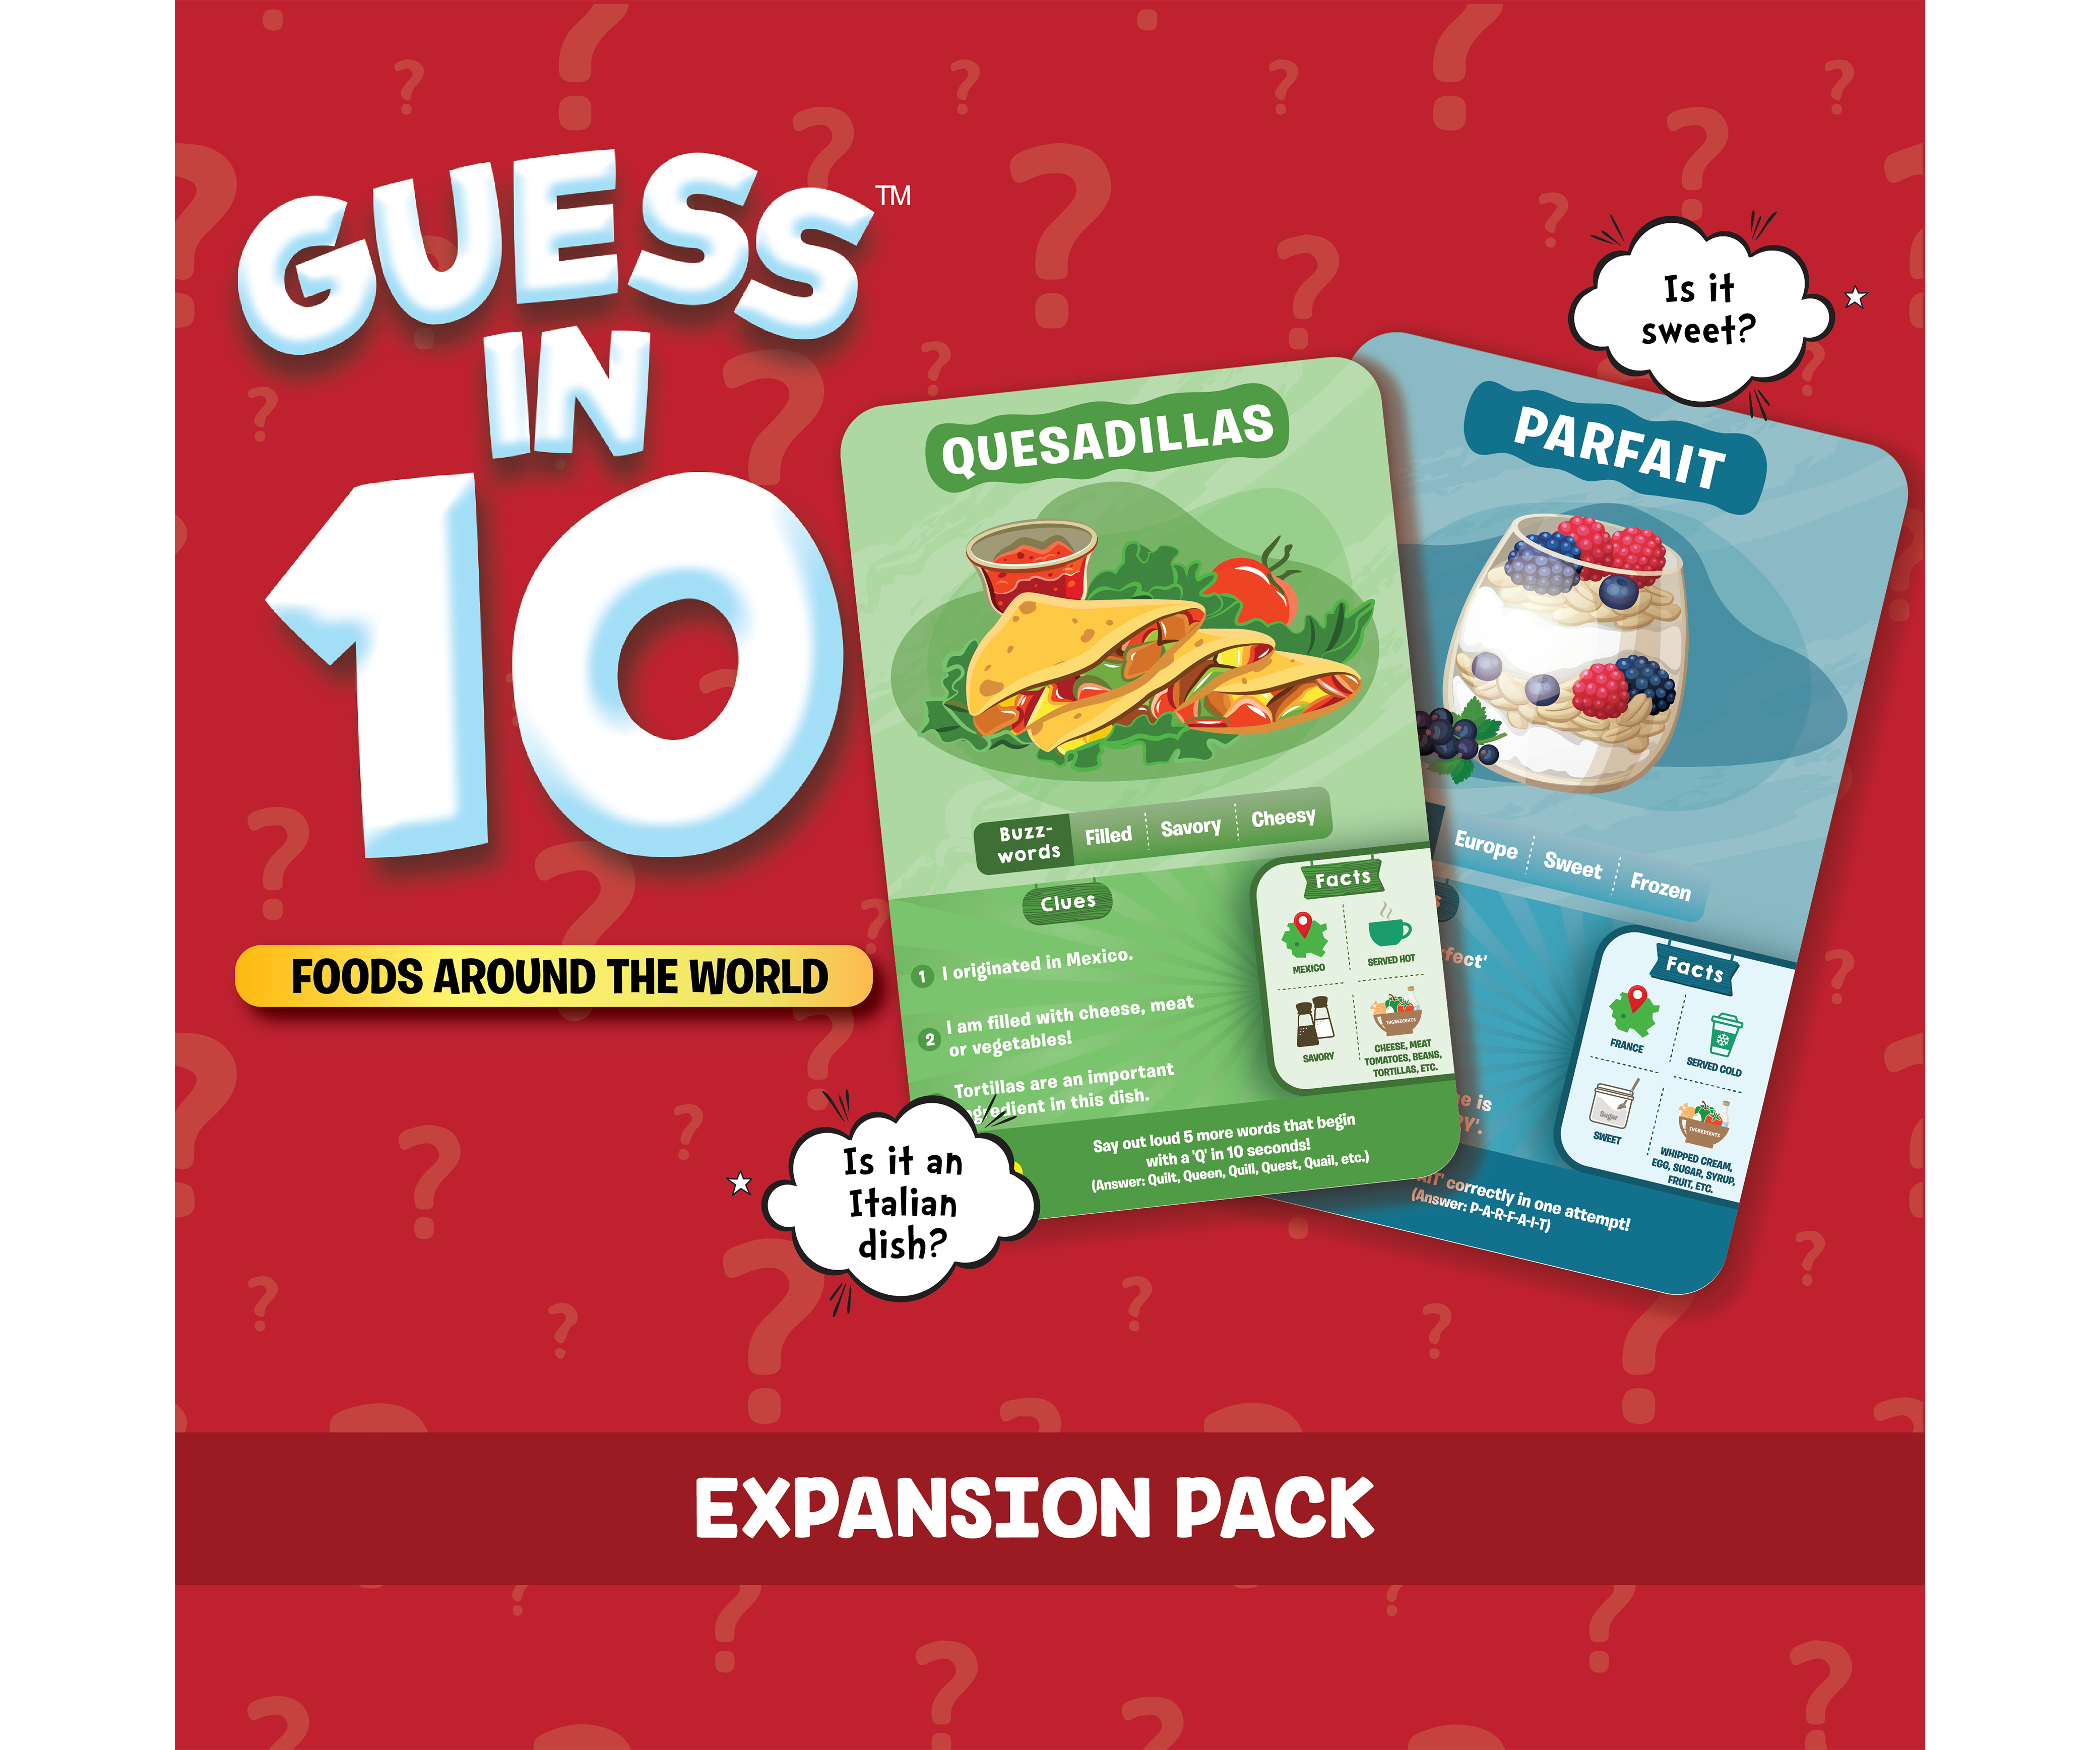 Guess in 10 Foods Around The World - Downloadable Expansion Pack